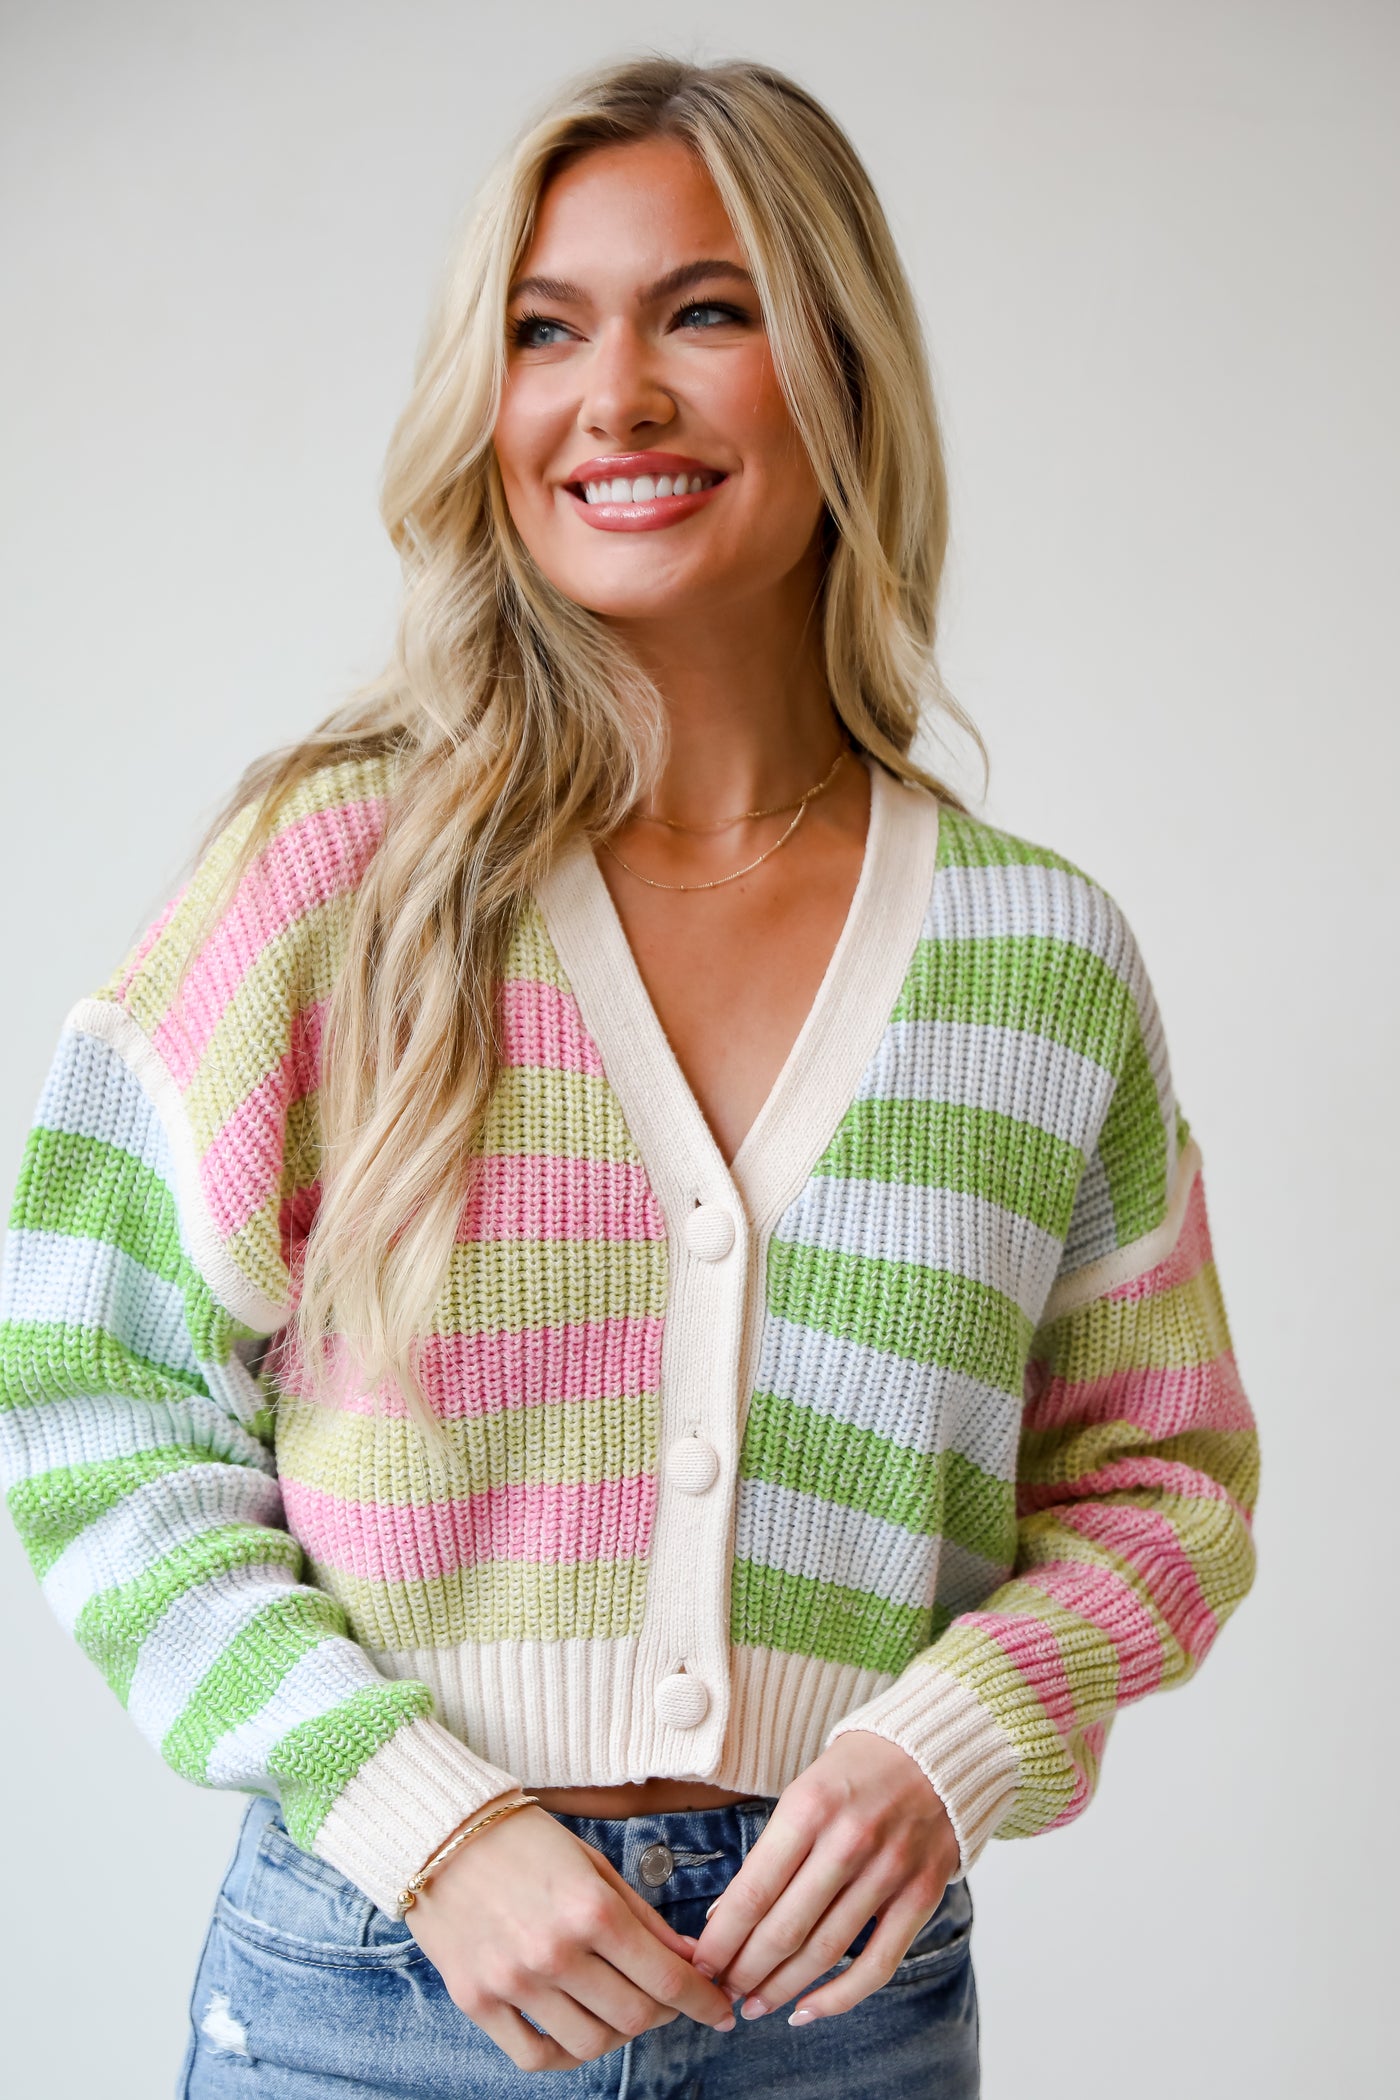 FINAL SALE - Remarkably Cute Striped Color Block Knit Cardigan